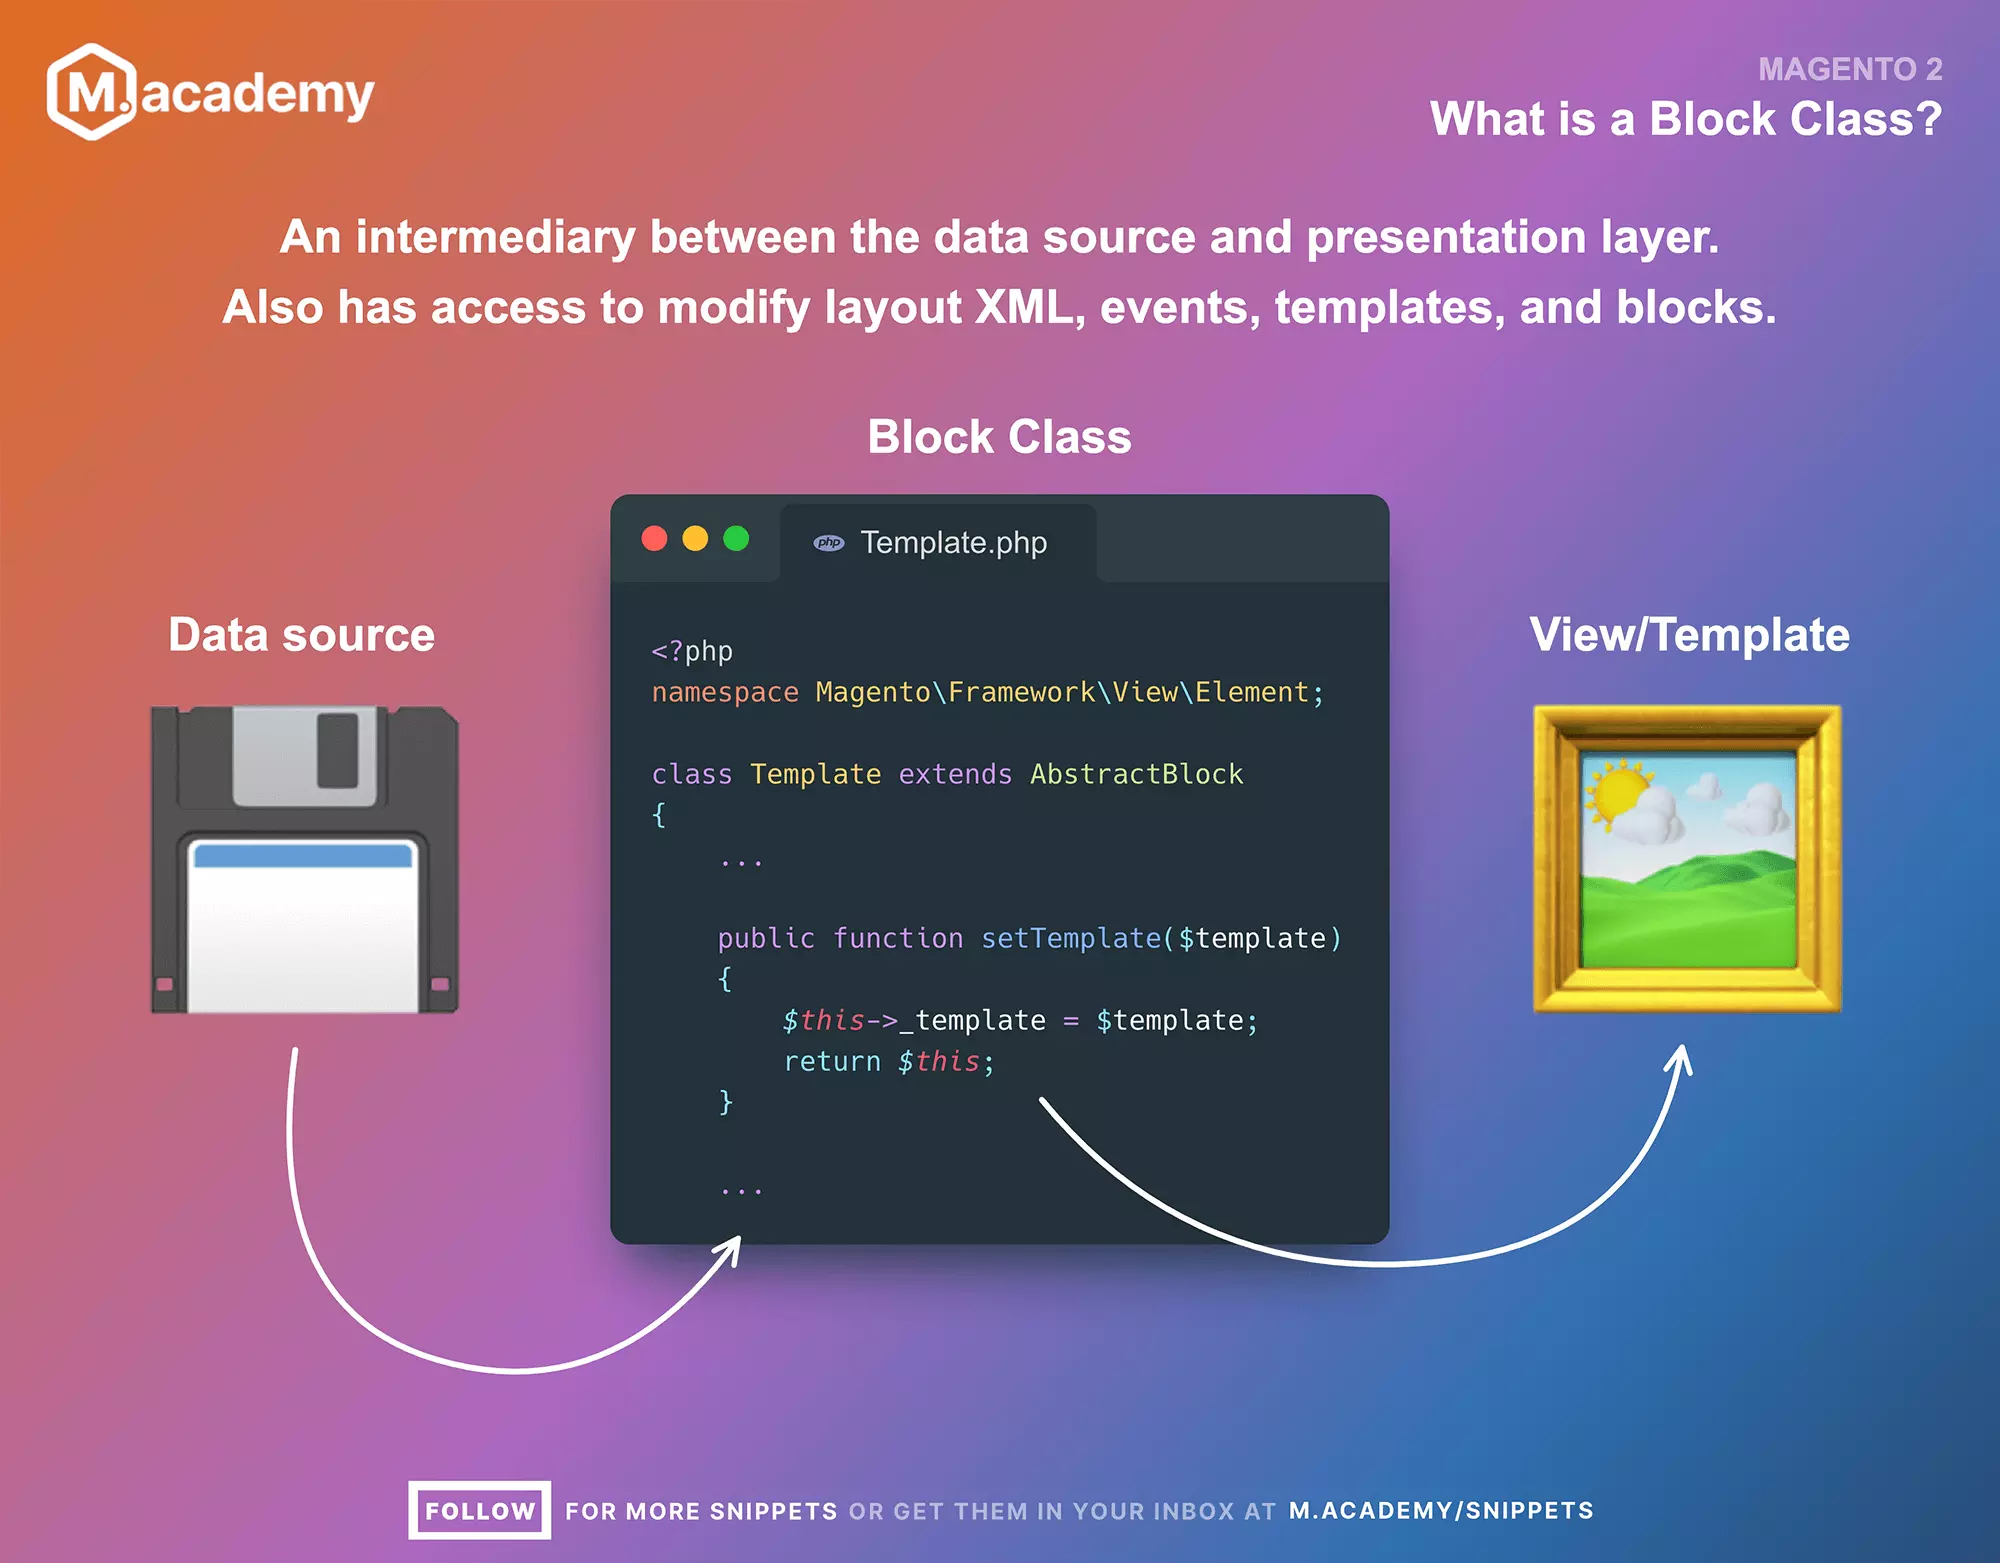 What is a Block Class in Magento?